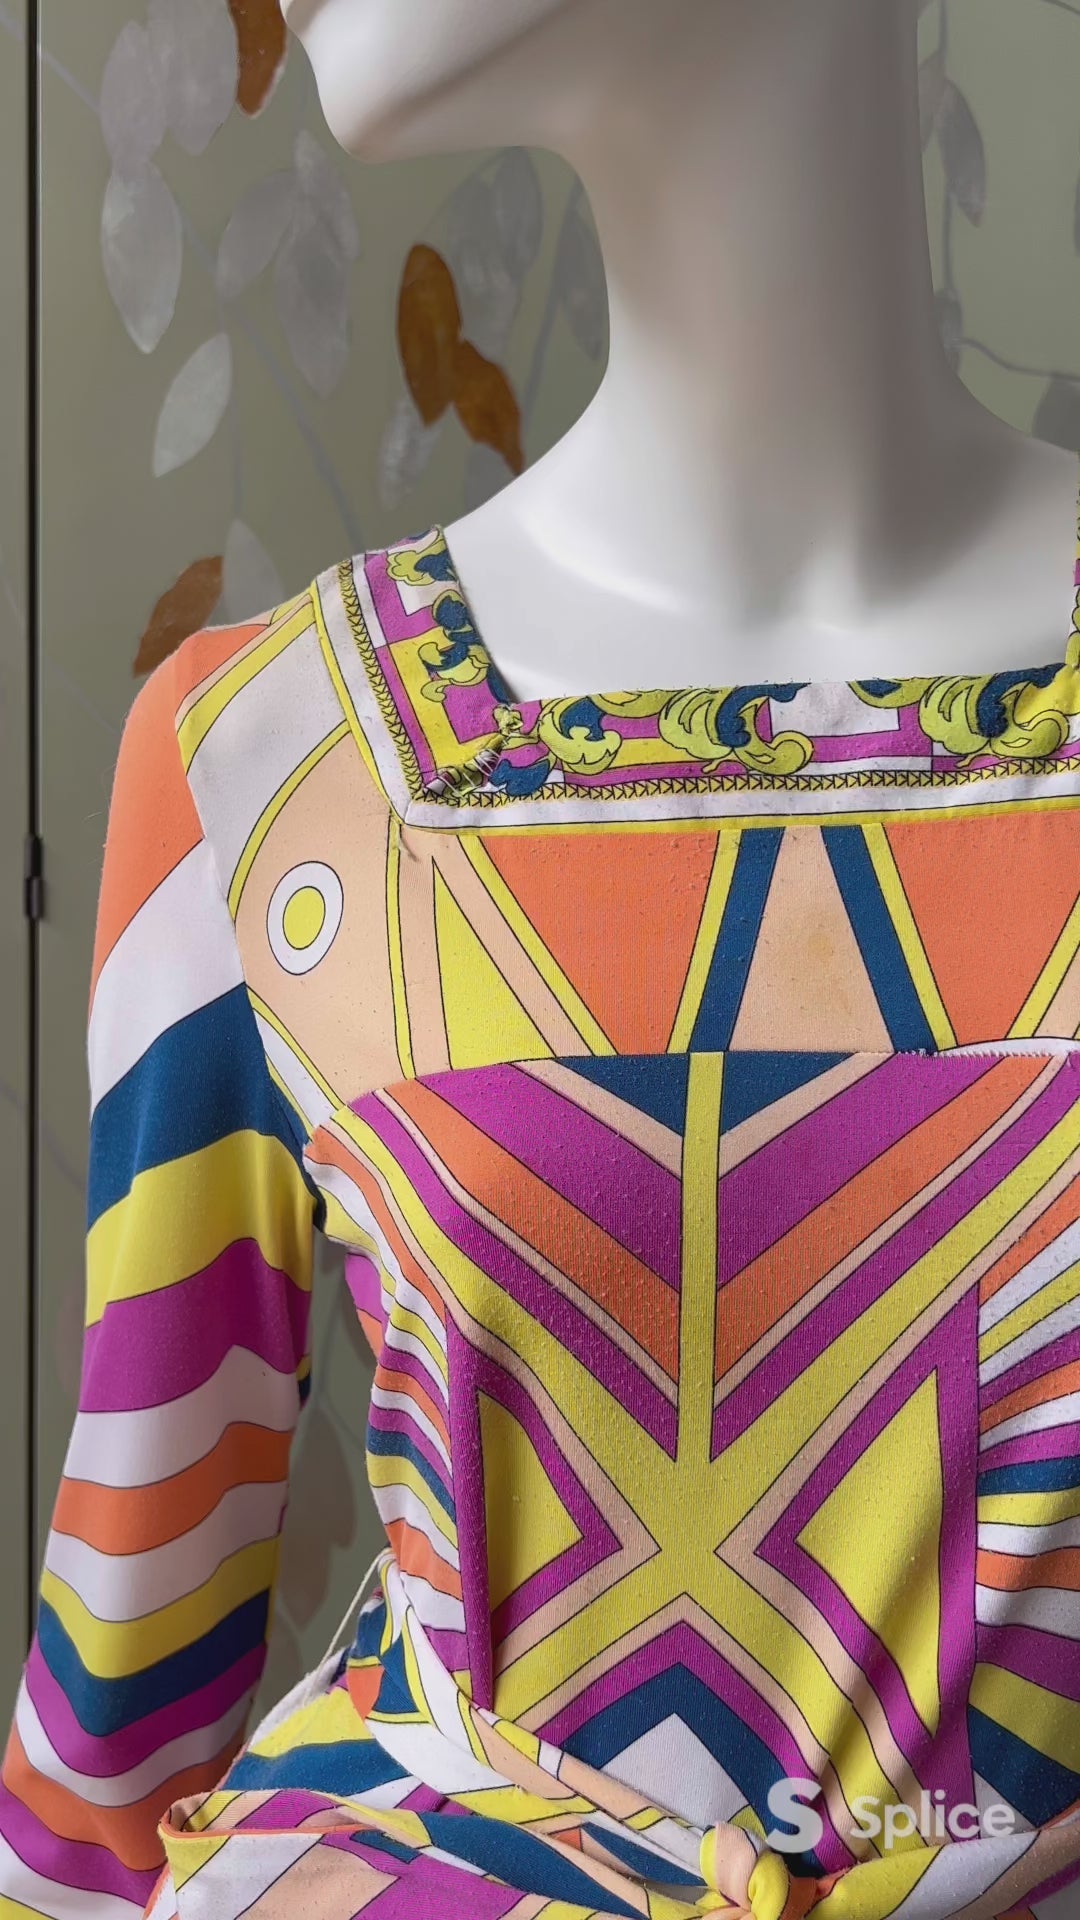 Did you know? In the 1960's, Emilio Pucci introduced silk jersey